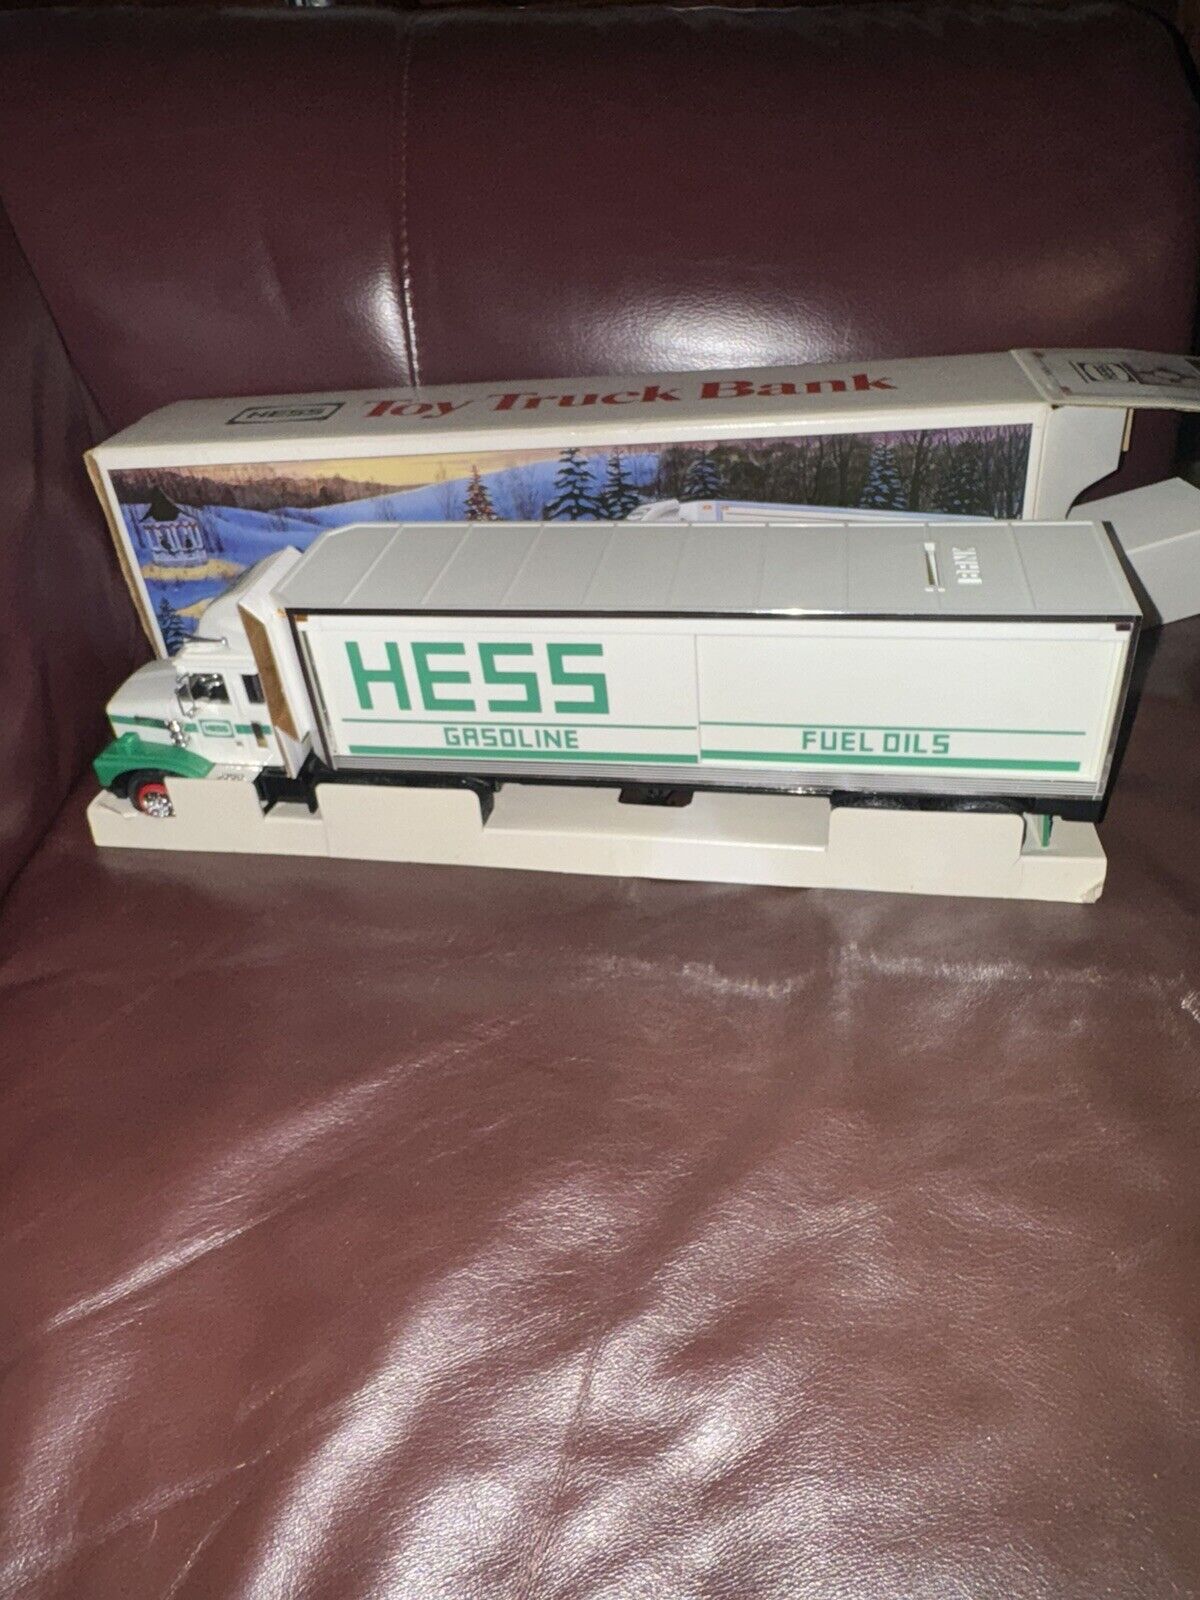 Hess 1987 Toy Truck Bank(c)